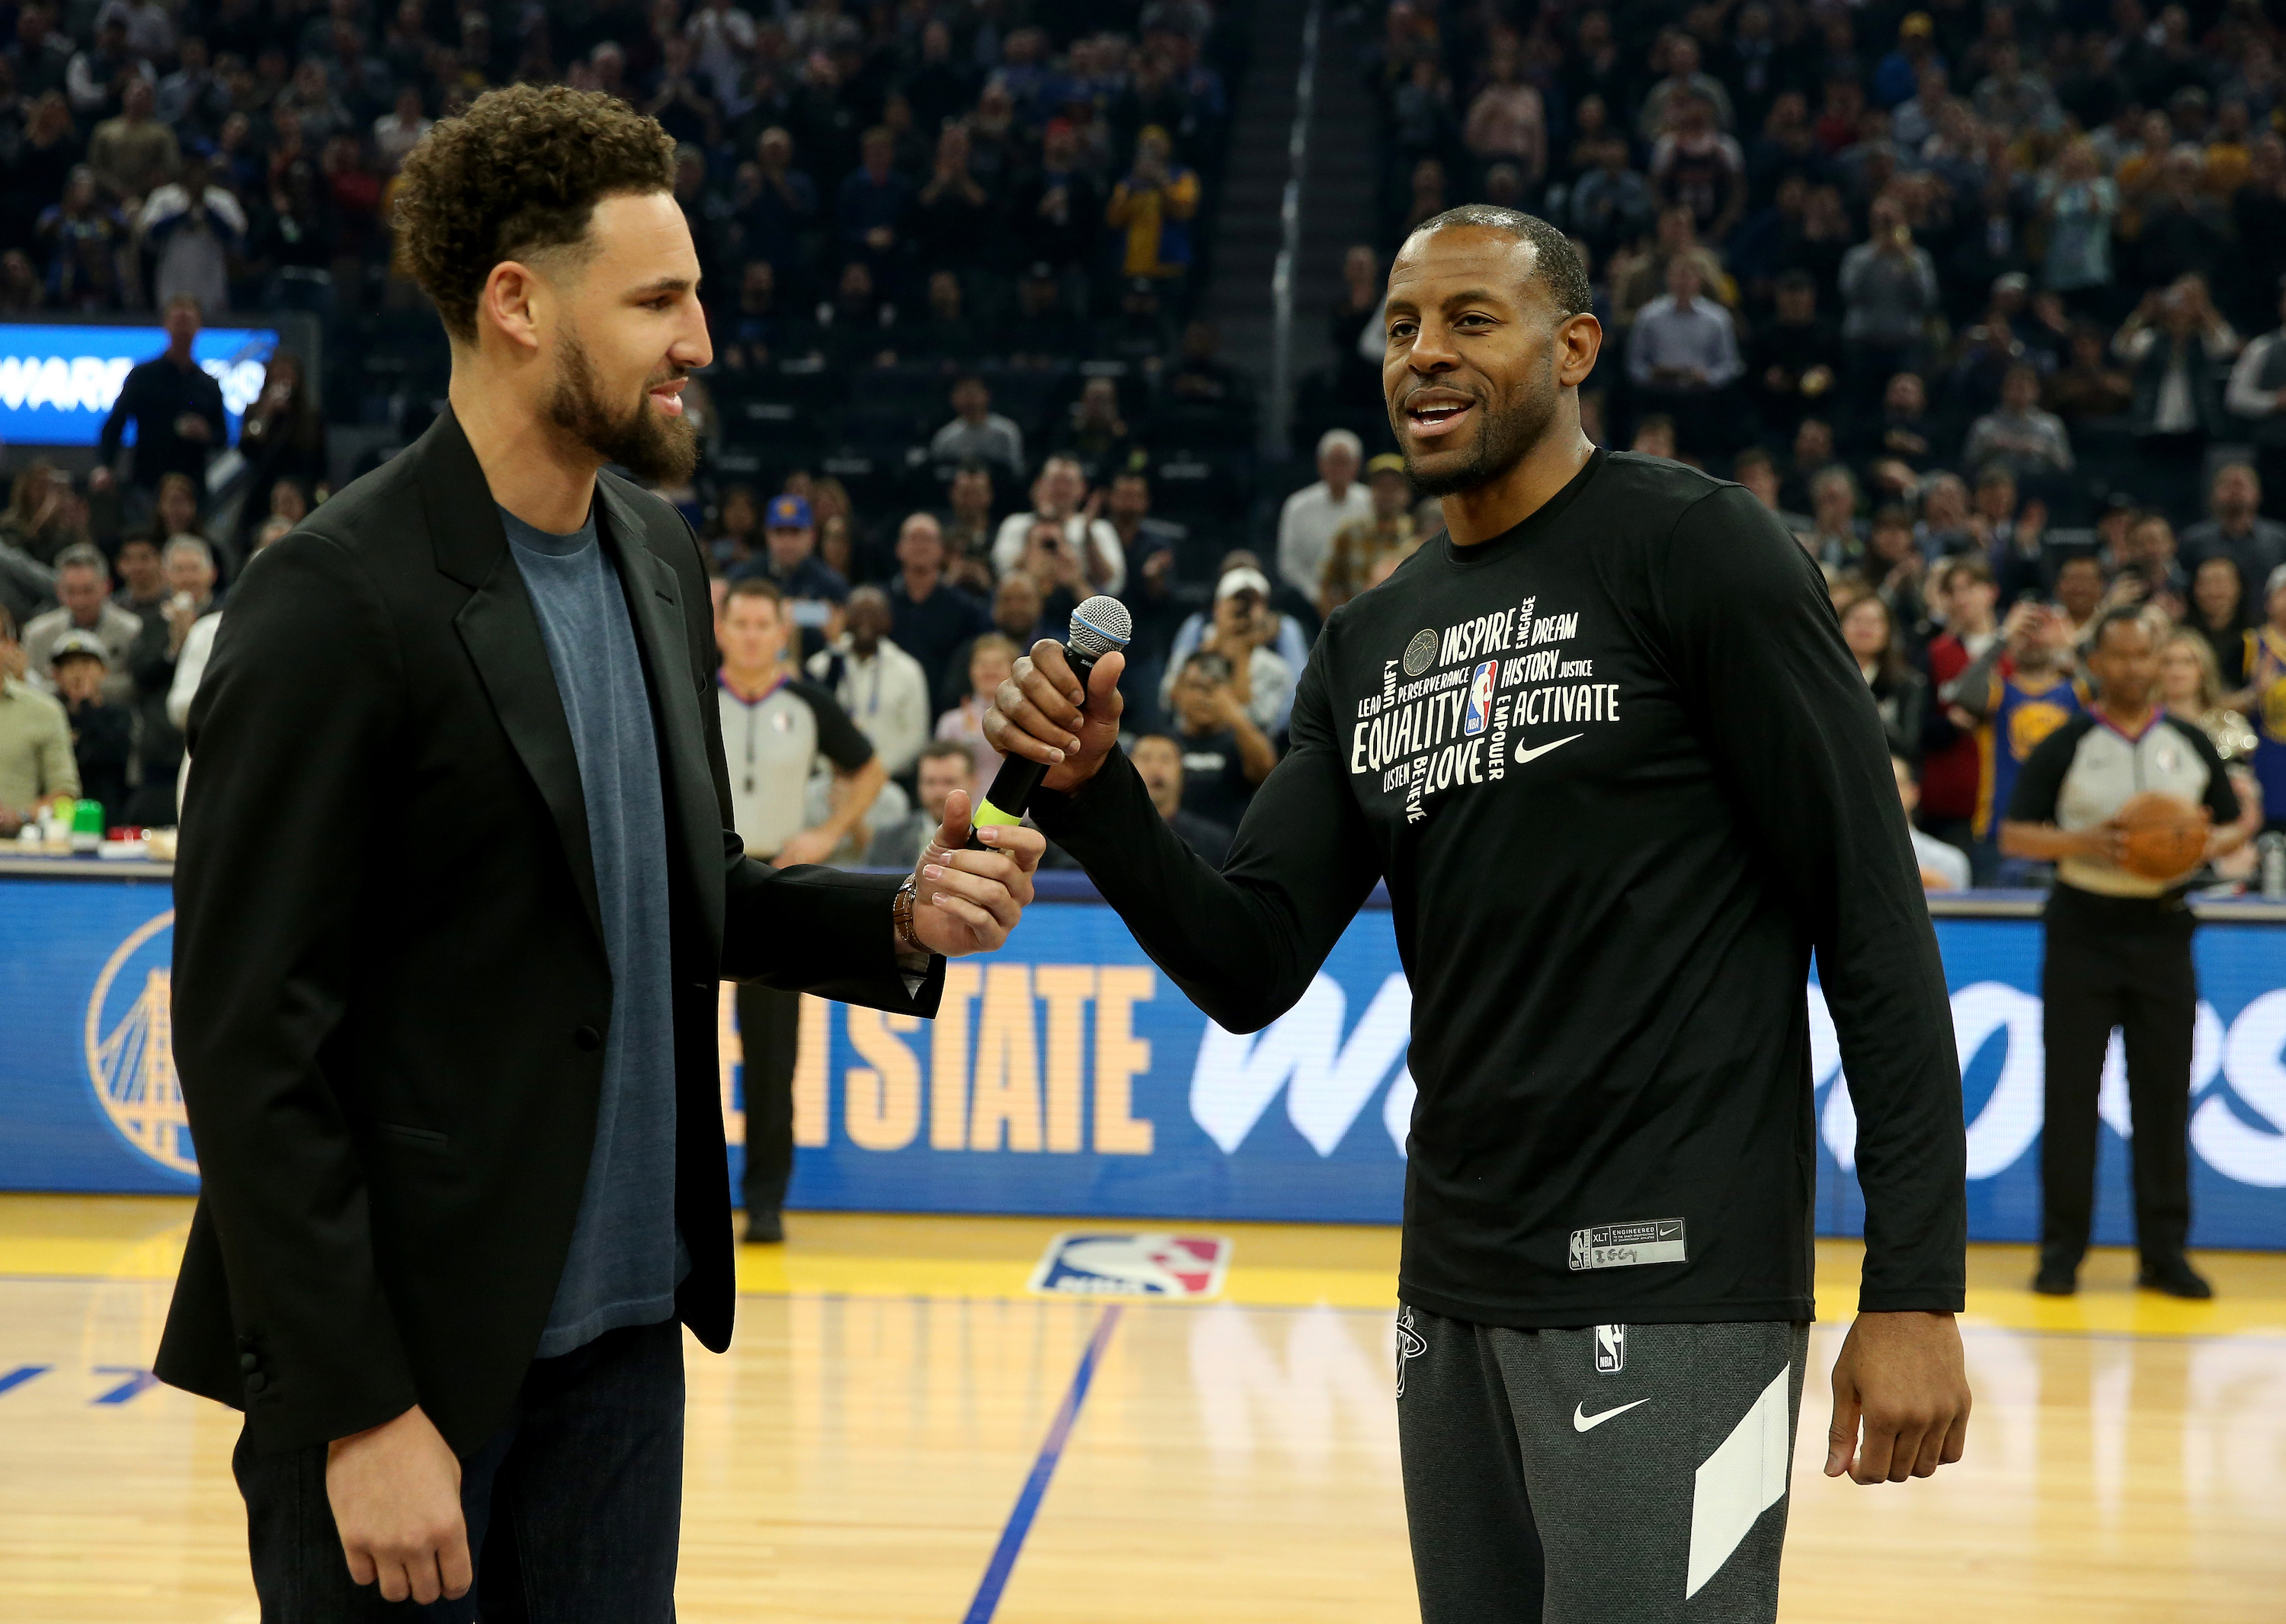 Warriors star Klay Thompson passes the microphone to Andre Iguodala before a game in February of 2020